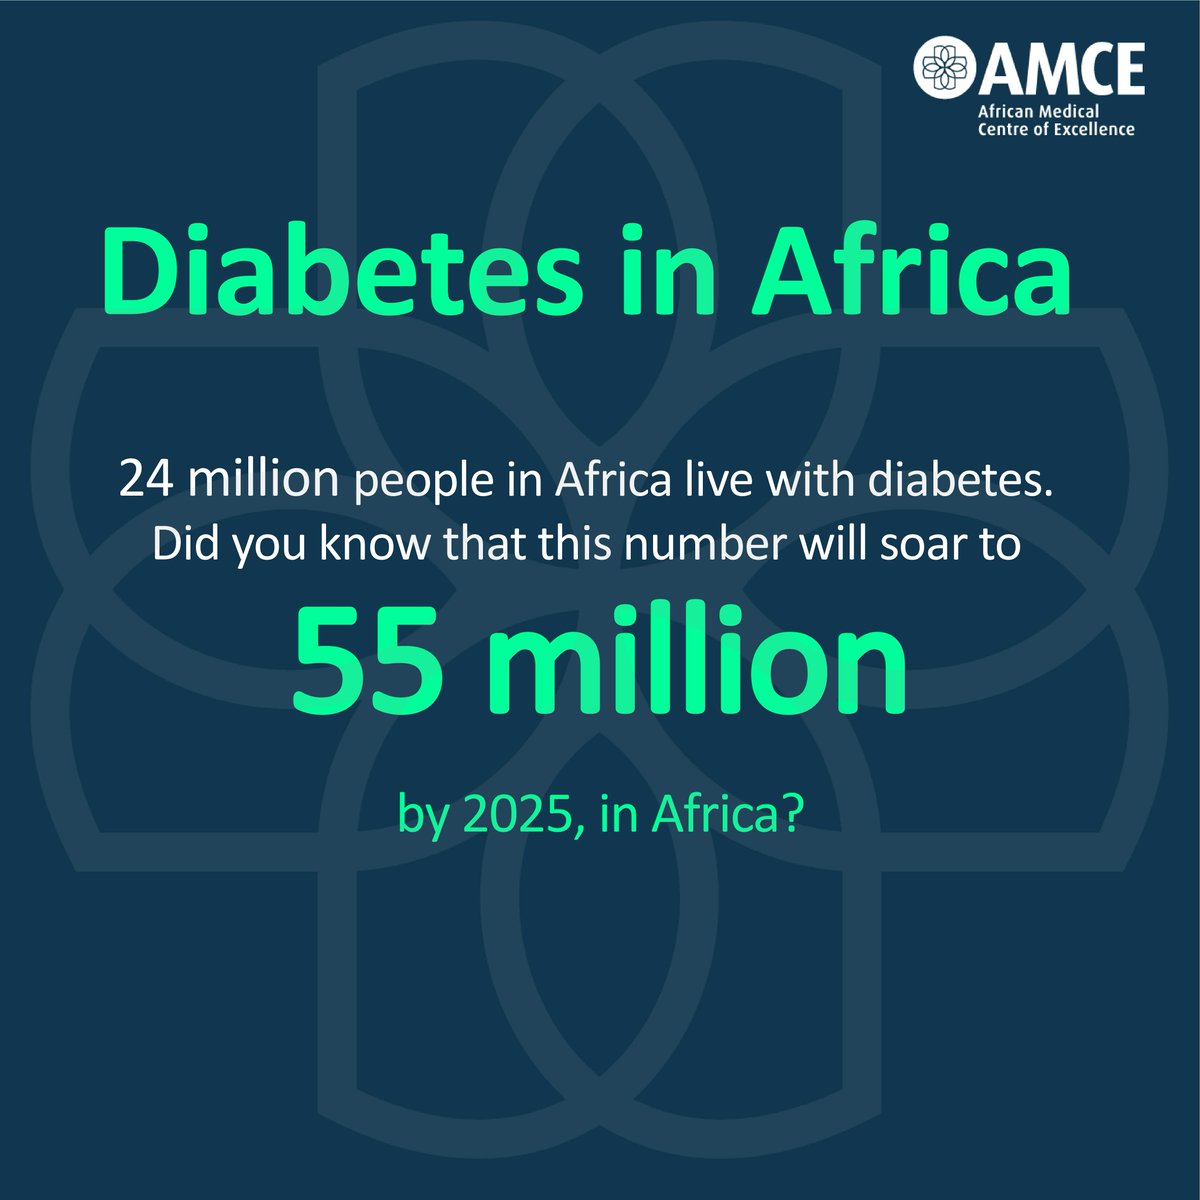 Did you know 24 million adults in #Africa have diabetes? By 2045, it could rise to 55 million. In 2021, diabetes claimed 416,000 lives in Africa. Despite low diabetes-related expenditure, AMCE is poised to make a difference in diabetes care. 

#DiabetesAwareness #AMCE